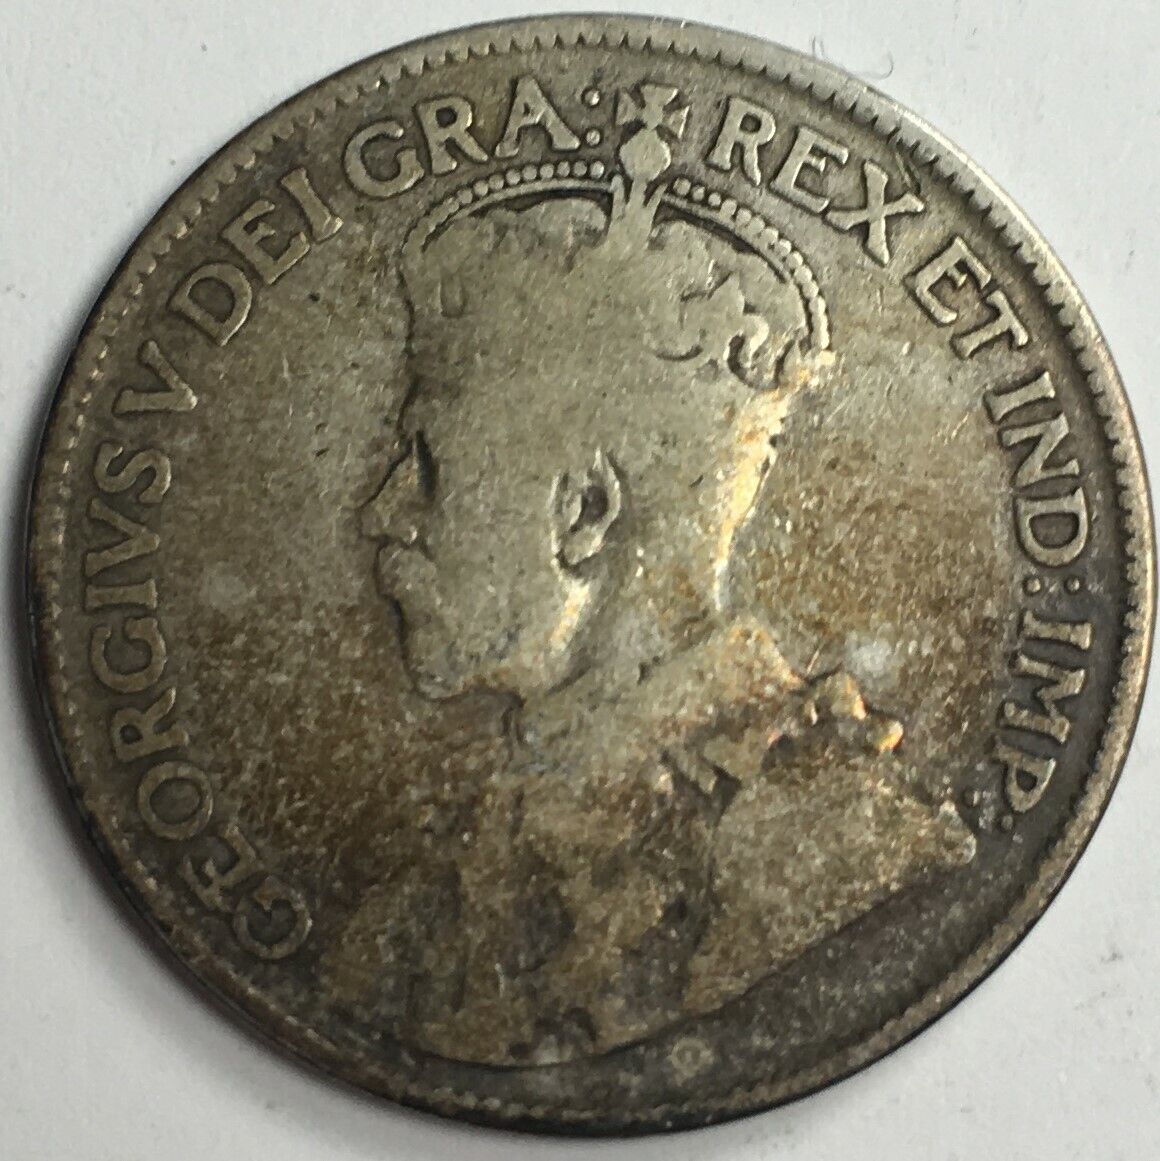 1919 Newfoundland 25 Cents - George V - 92.5% Silver Coin - Km#17 - 2465